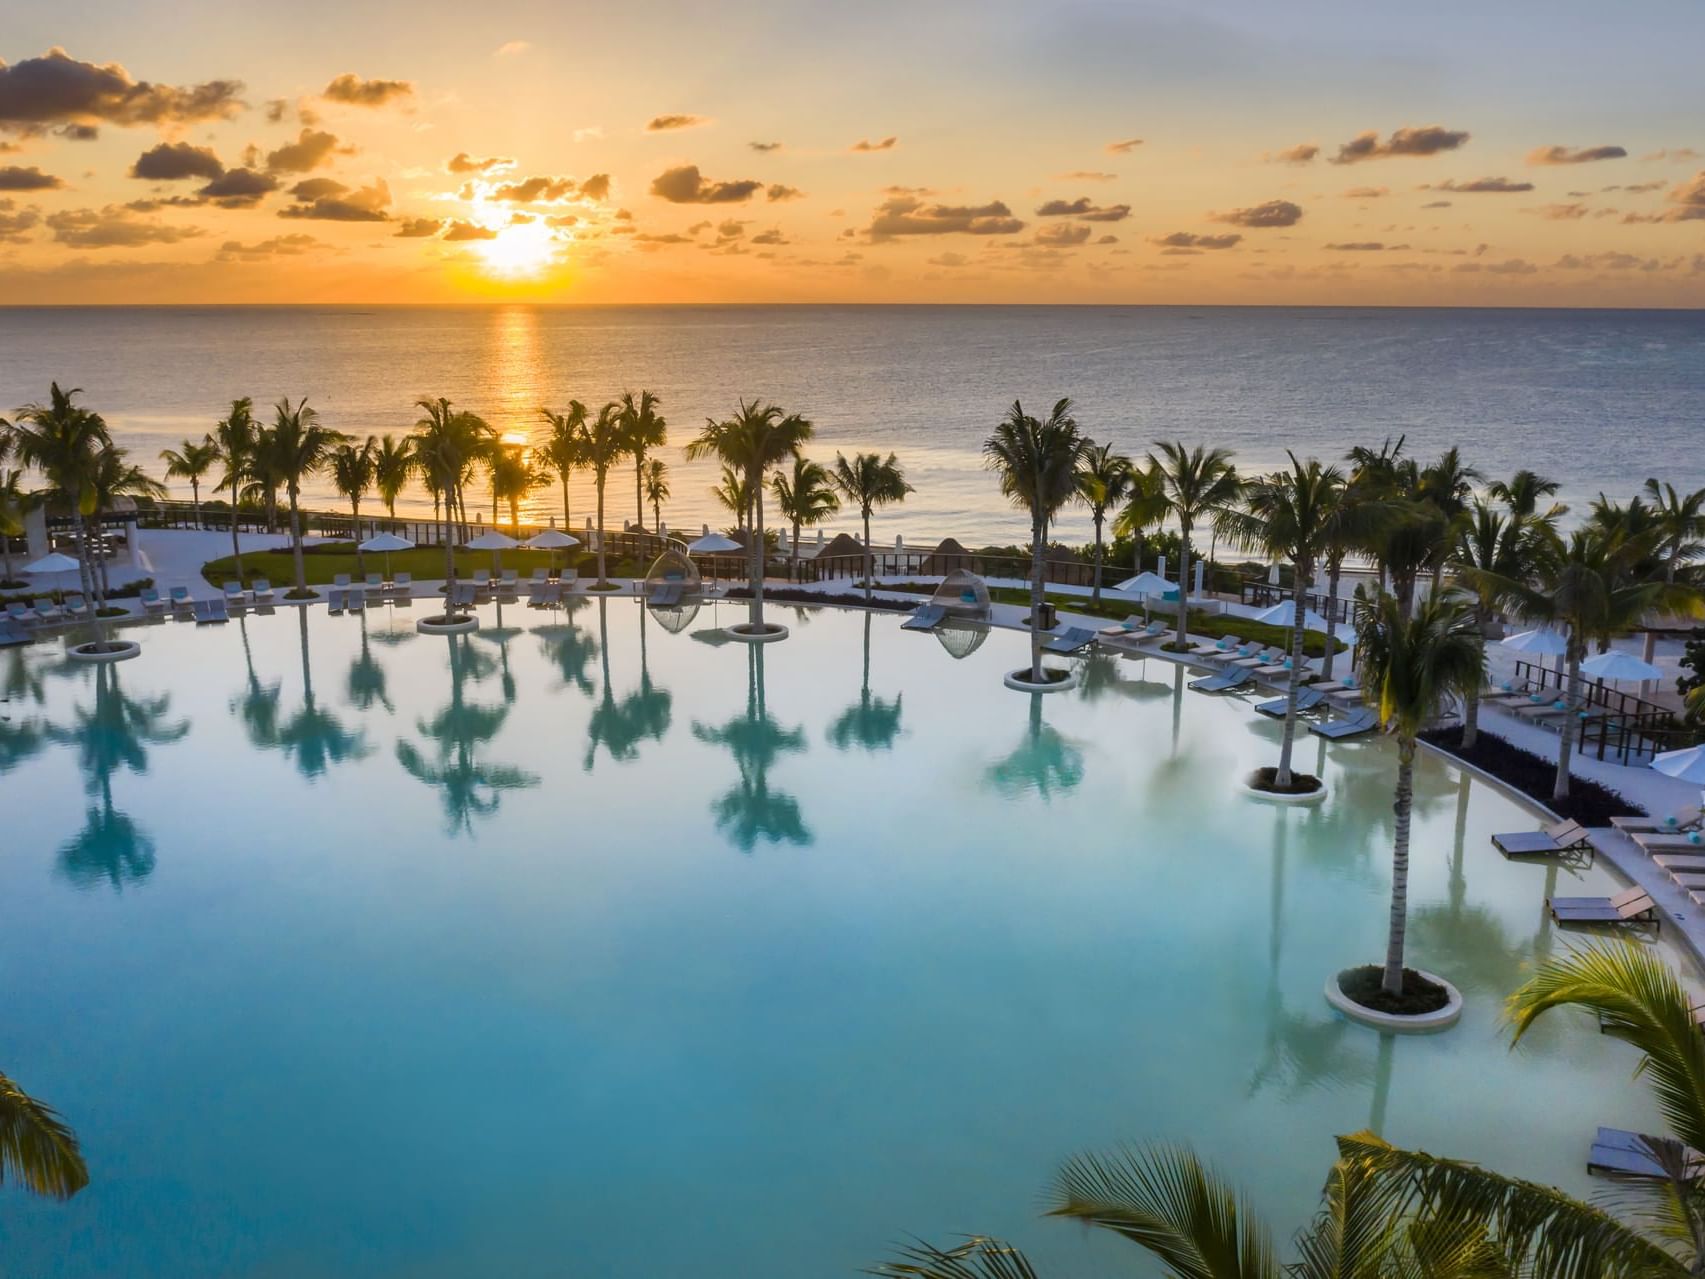 Outdoor pool overlooking the beach at Haven Riviera Cancun